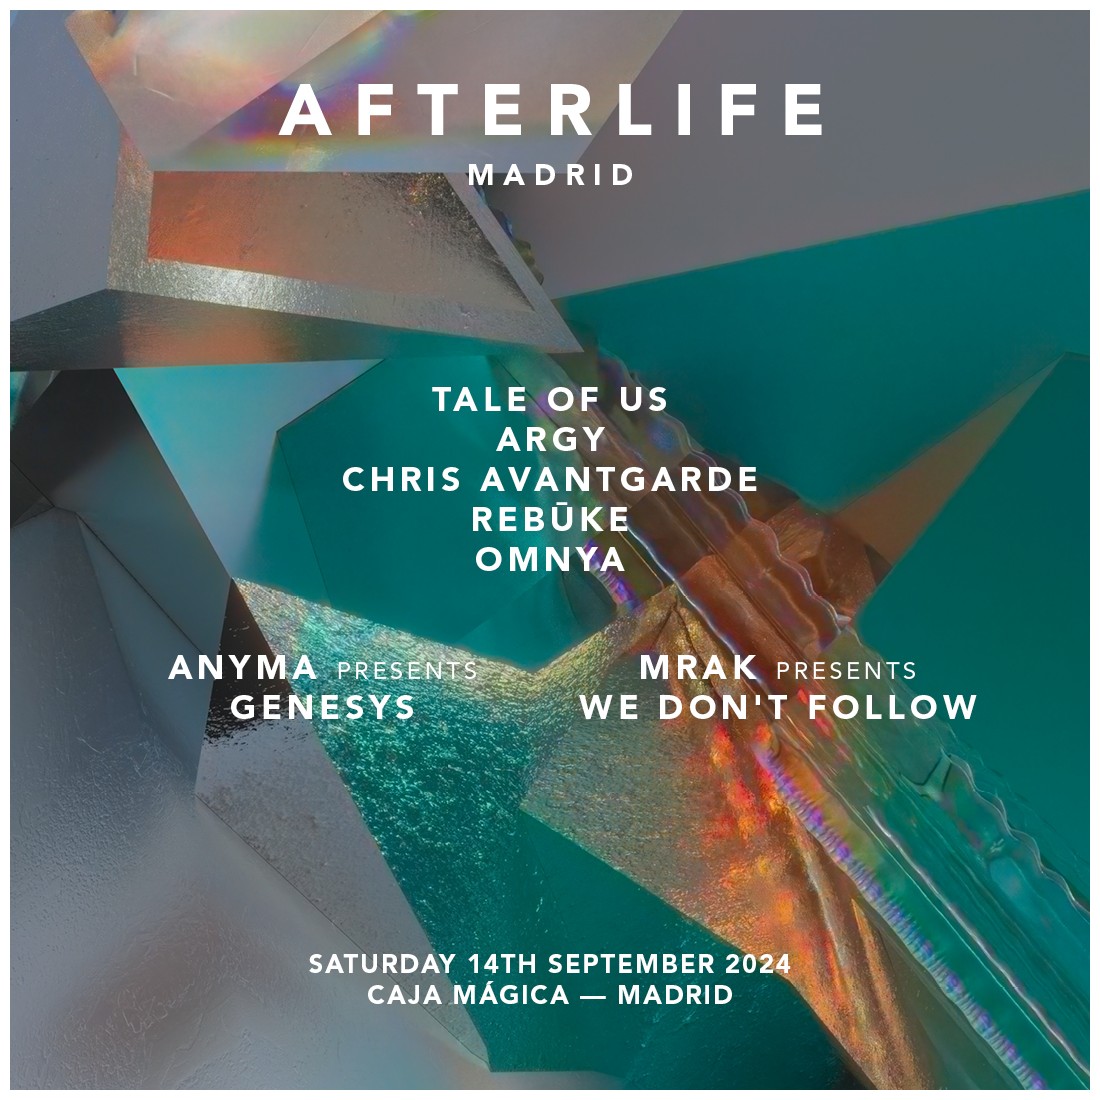 AFTERLIFE MADRID Septiembre 14 - GENERAL 2° Fase